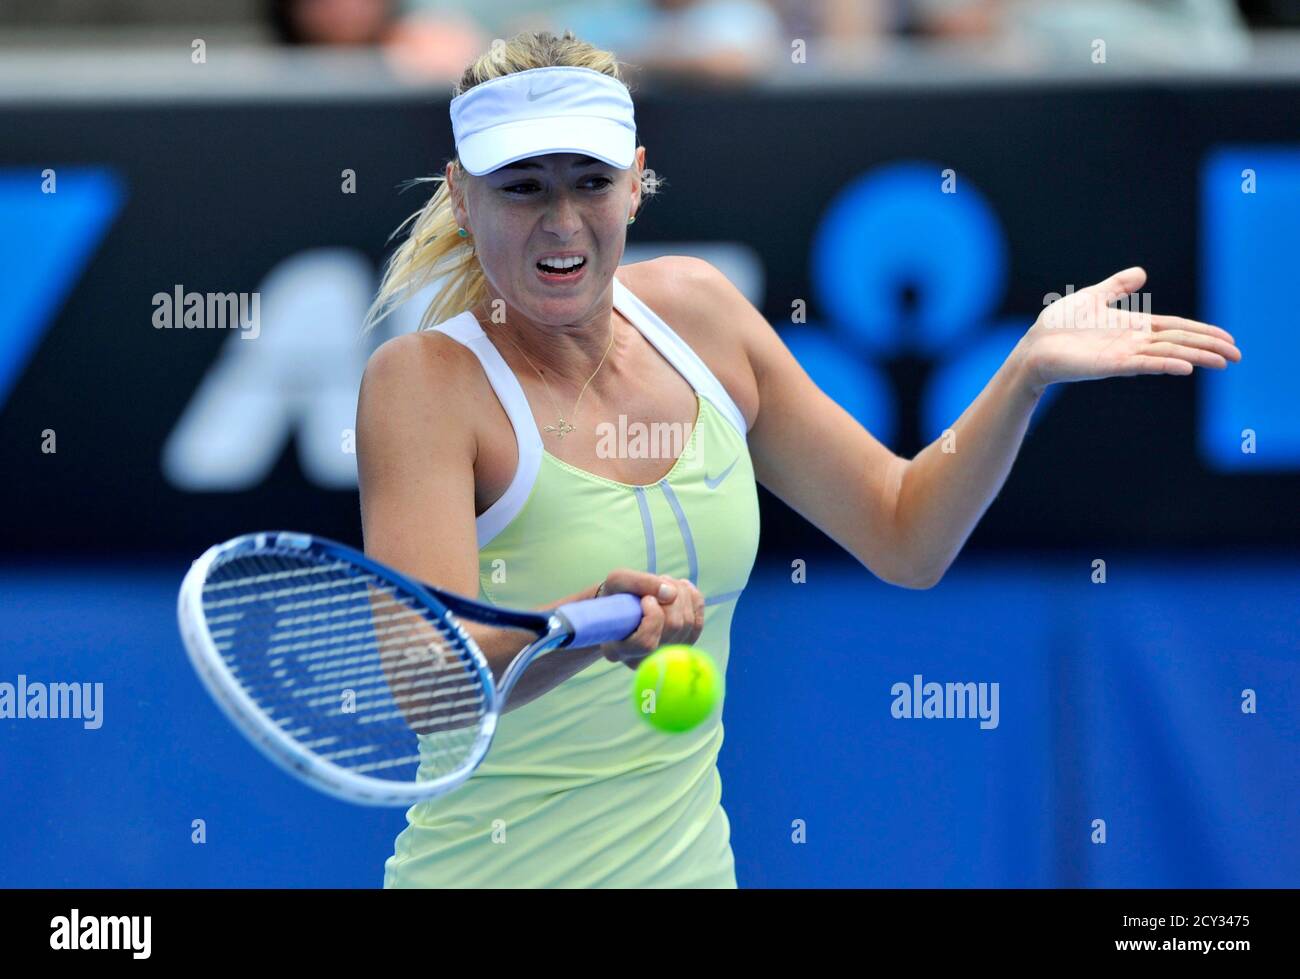 Maria Sharapova of Russia hits a return to Daniela Hantuchova of Slovakia  during an exhibition match at the Australian Open tennis tournament in  Melbourne January 12, 2013. REUTERS/Toby Melville (AUSTRALIA - Tags: